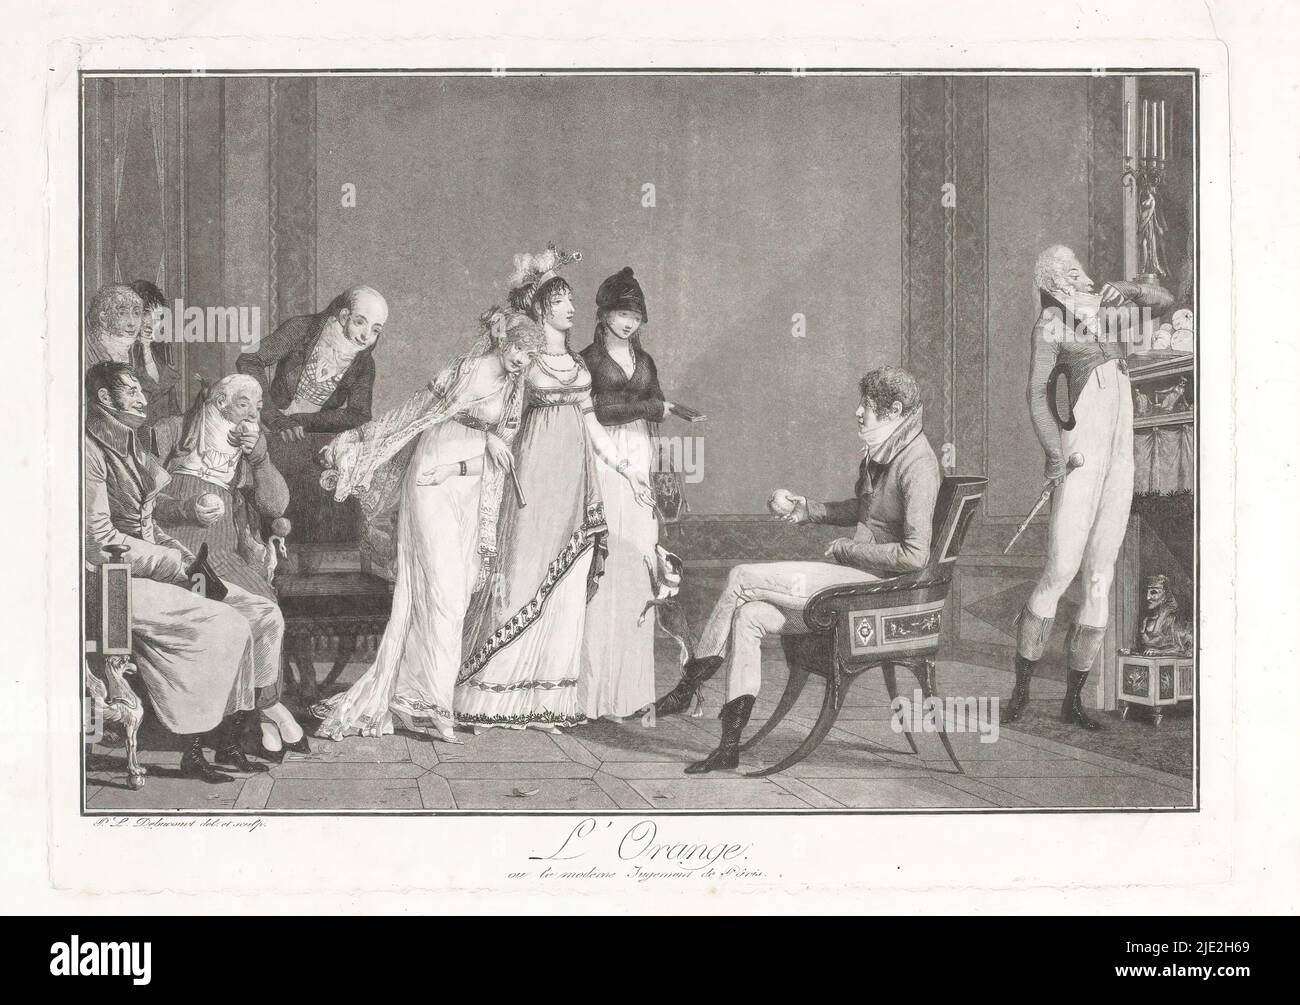 Judgment of Paris, L'Orange, ou le moderne jugement de Paris (title on object), Company in an interior with three young women in front of a young man in a chair holding an orange., print maker: Philibert-Louis Debucourt, (mentioned on object), after own design by: Philibert-Louis Debucourt, (mentioned on object), publisher: Les Marchands de Nouveautés, (possibly), print maker: France, after own design by: France, publisher: Paris, 1-Jan-1800, paper, etching, height 295 mm × width 414 mm Stock Photo